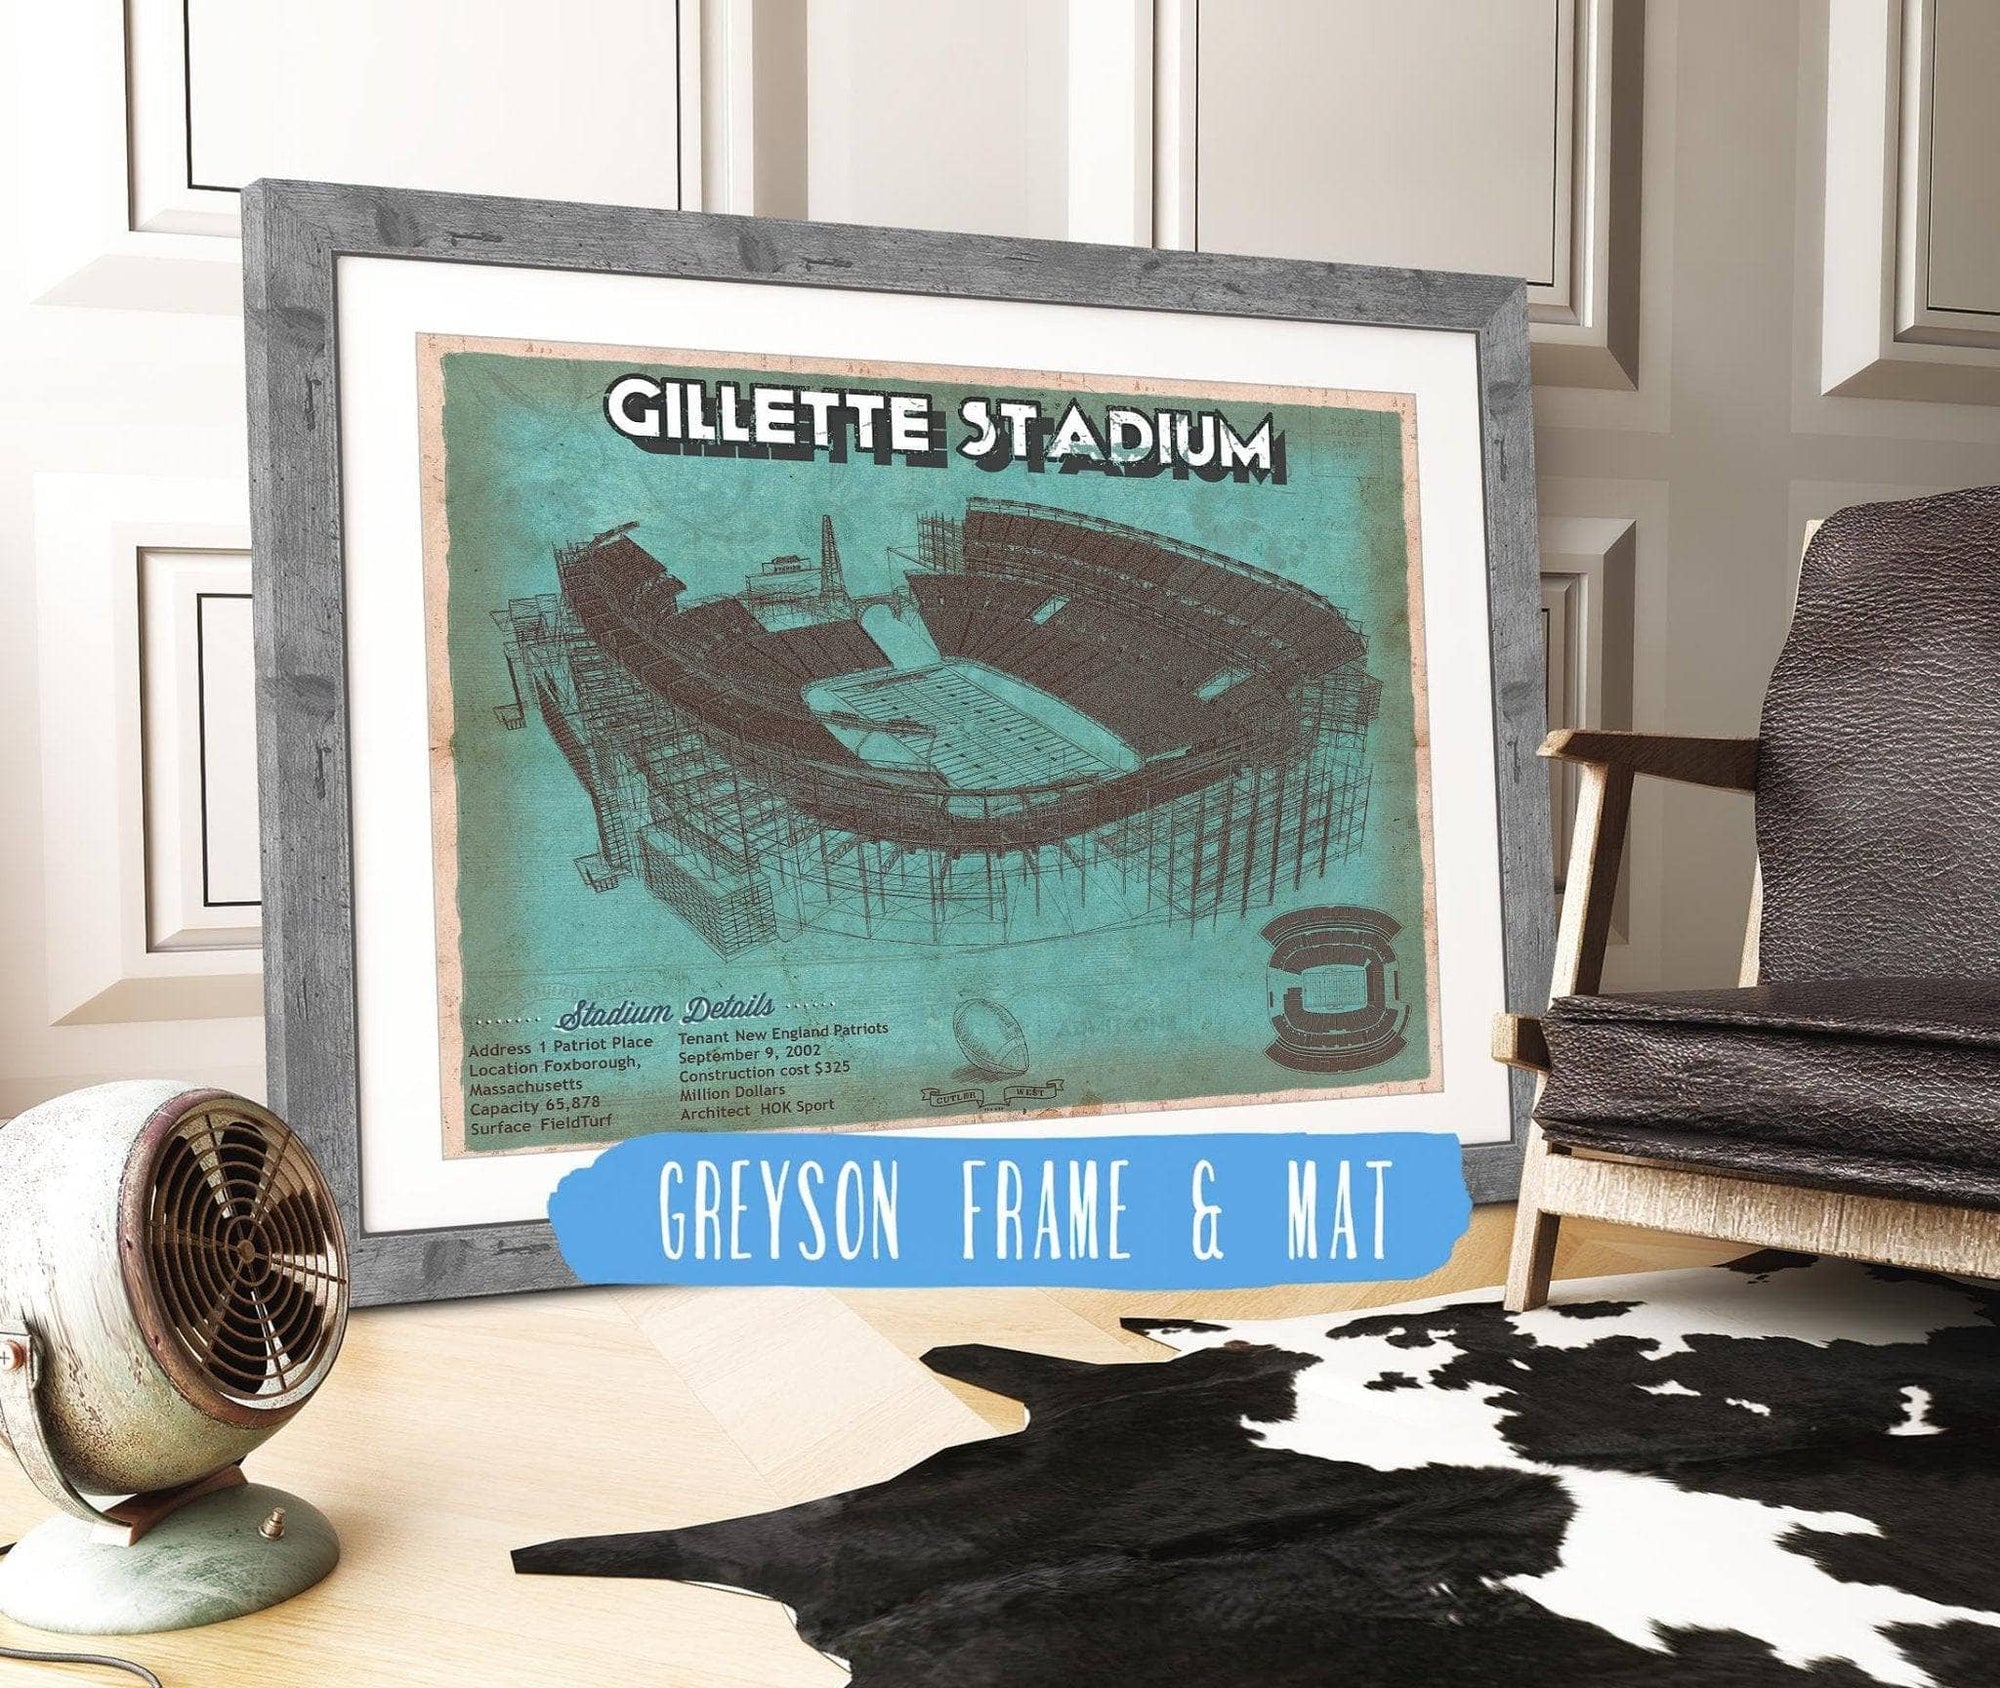 Cutler West Pro Football Collection 14" x 11" / Greyson Frame & Mat New England Patriots Gillette Stadium Seating Chart - Vintage Football Team Color Print 692087079_63462